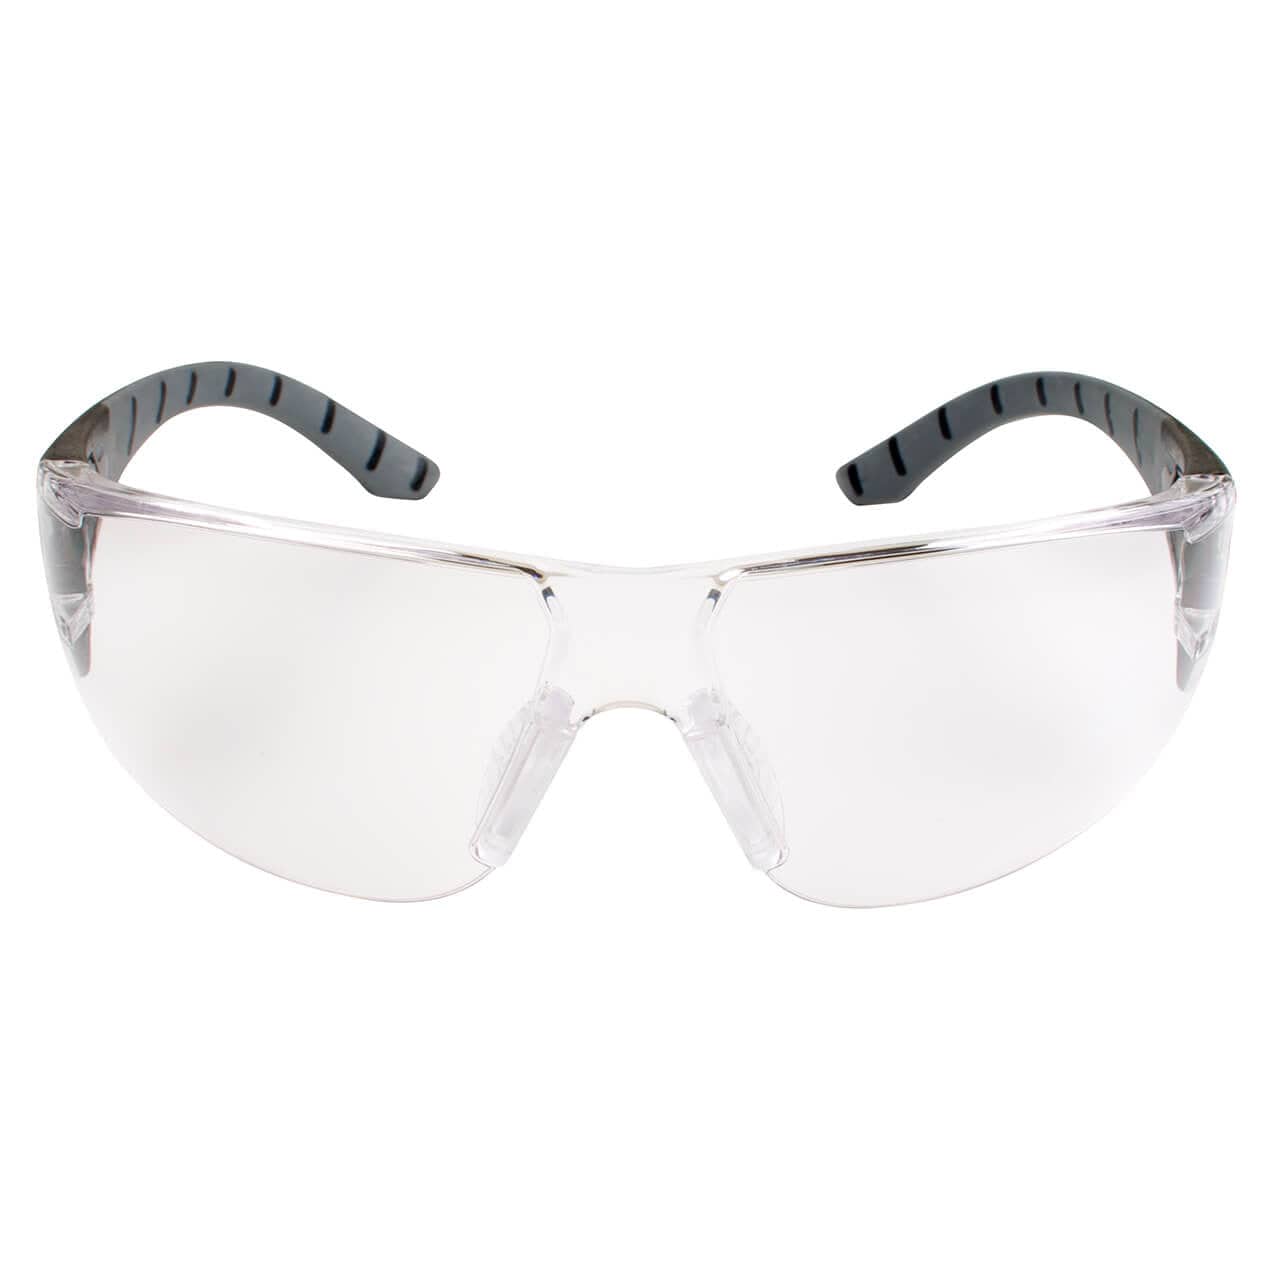 Metel M50 Safety Glasses with Clear Anti-Fog Lenses Front View